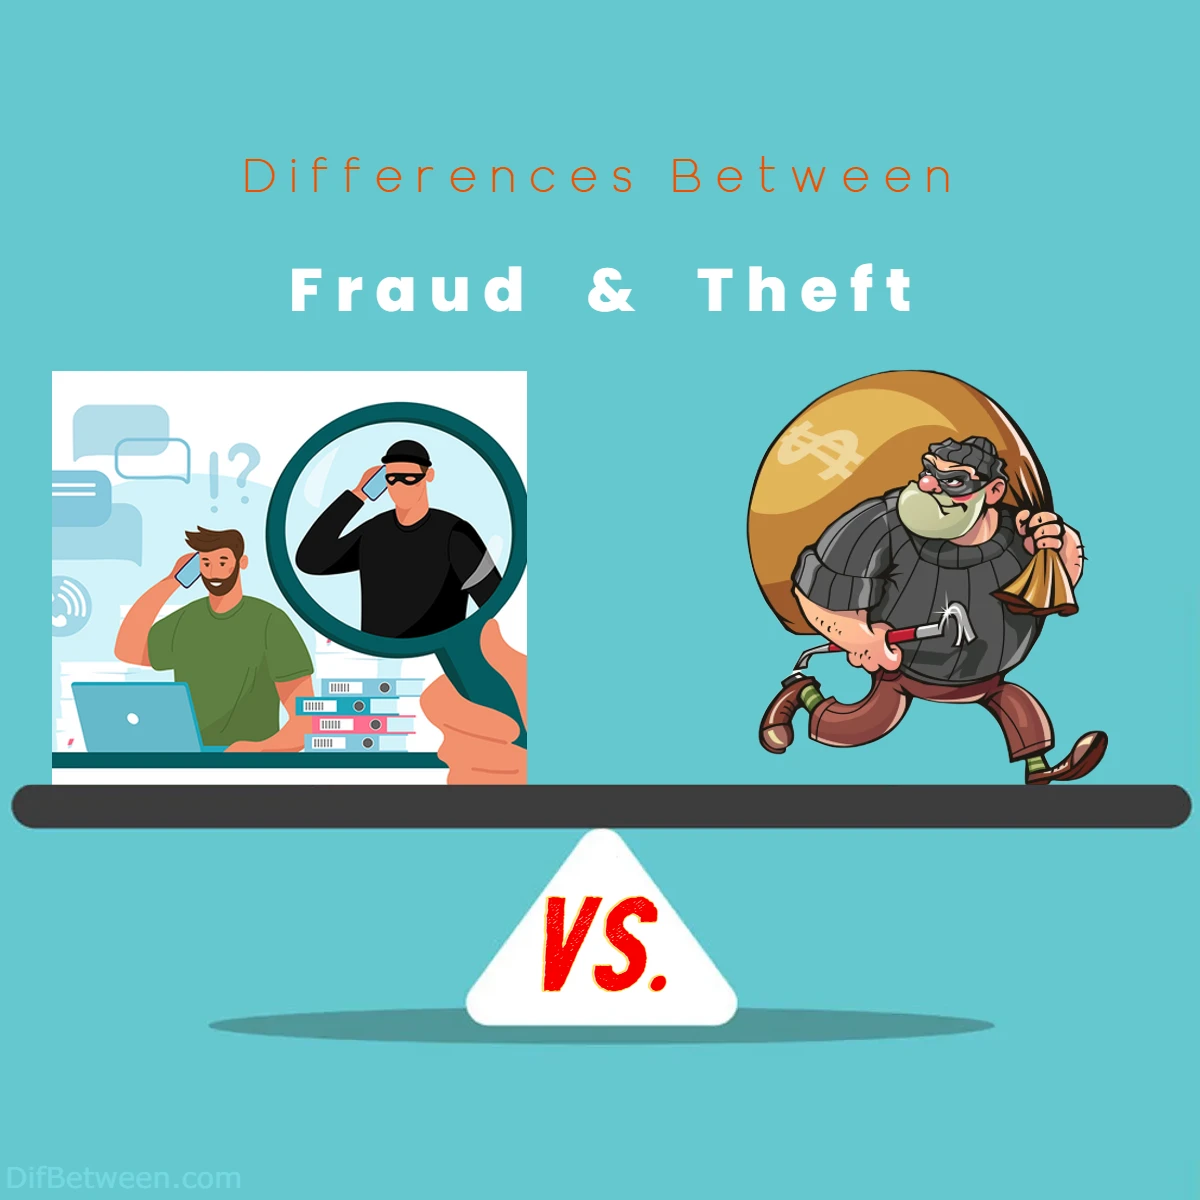 Differences Between Fraud vs Theft